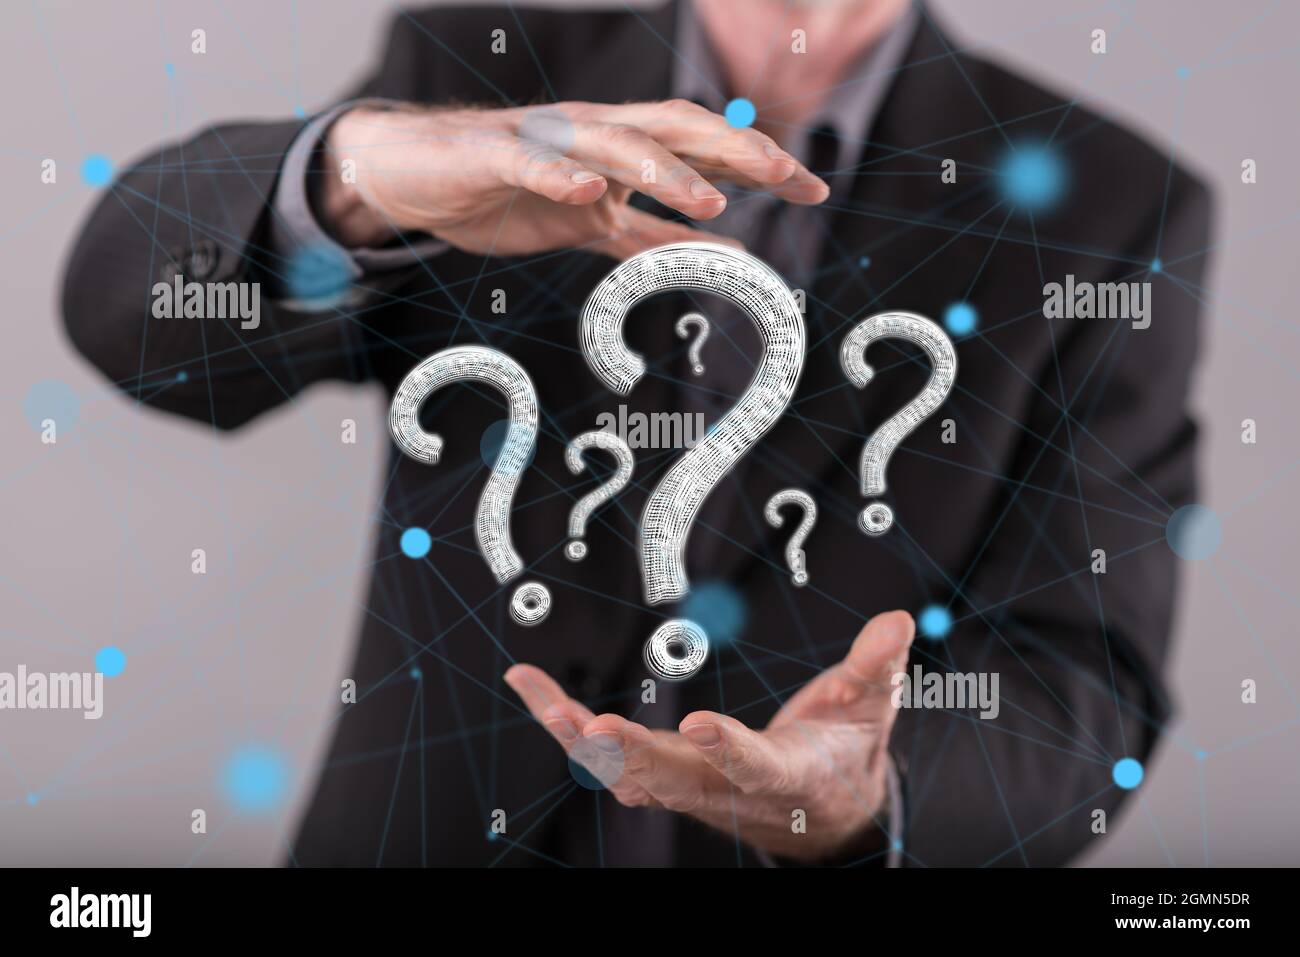 Question concept between hands of a man in background Stock Photo